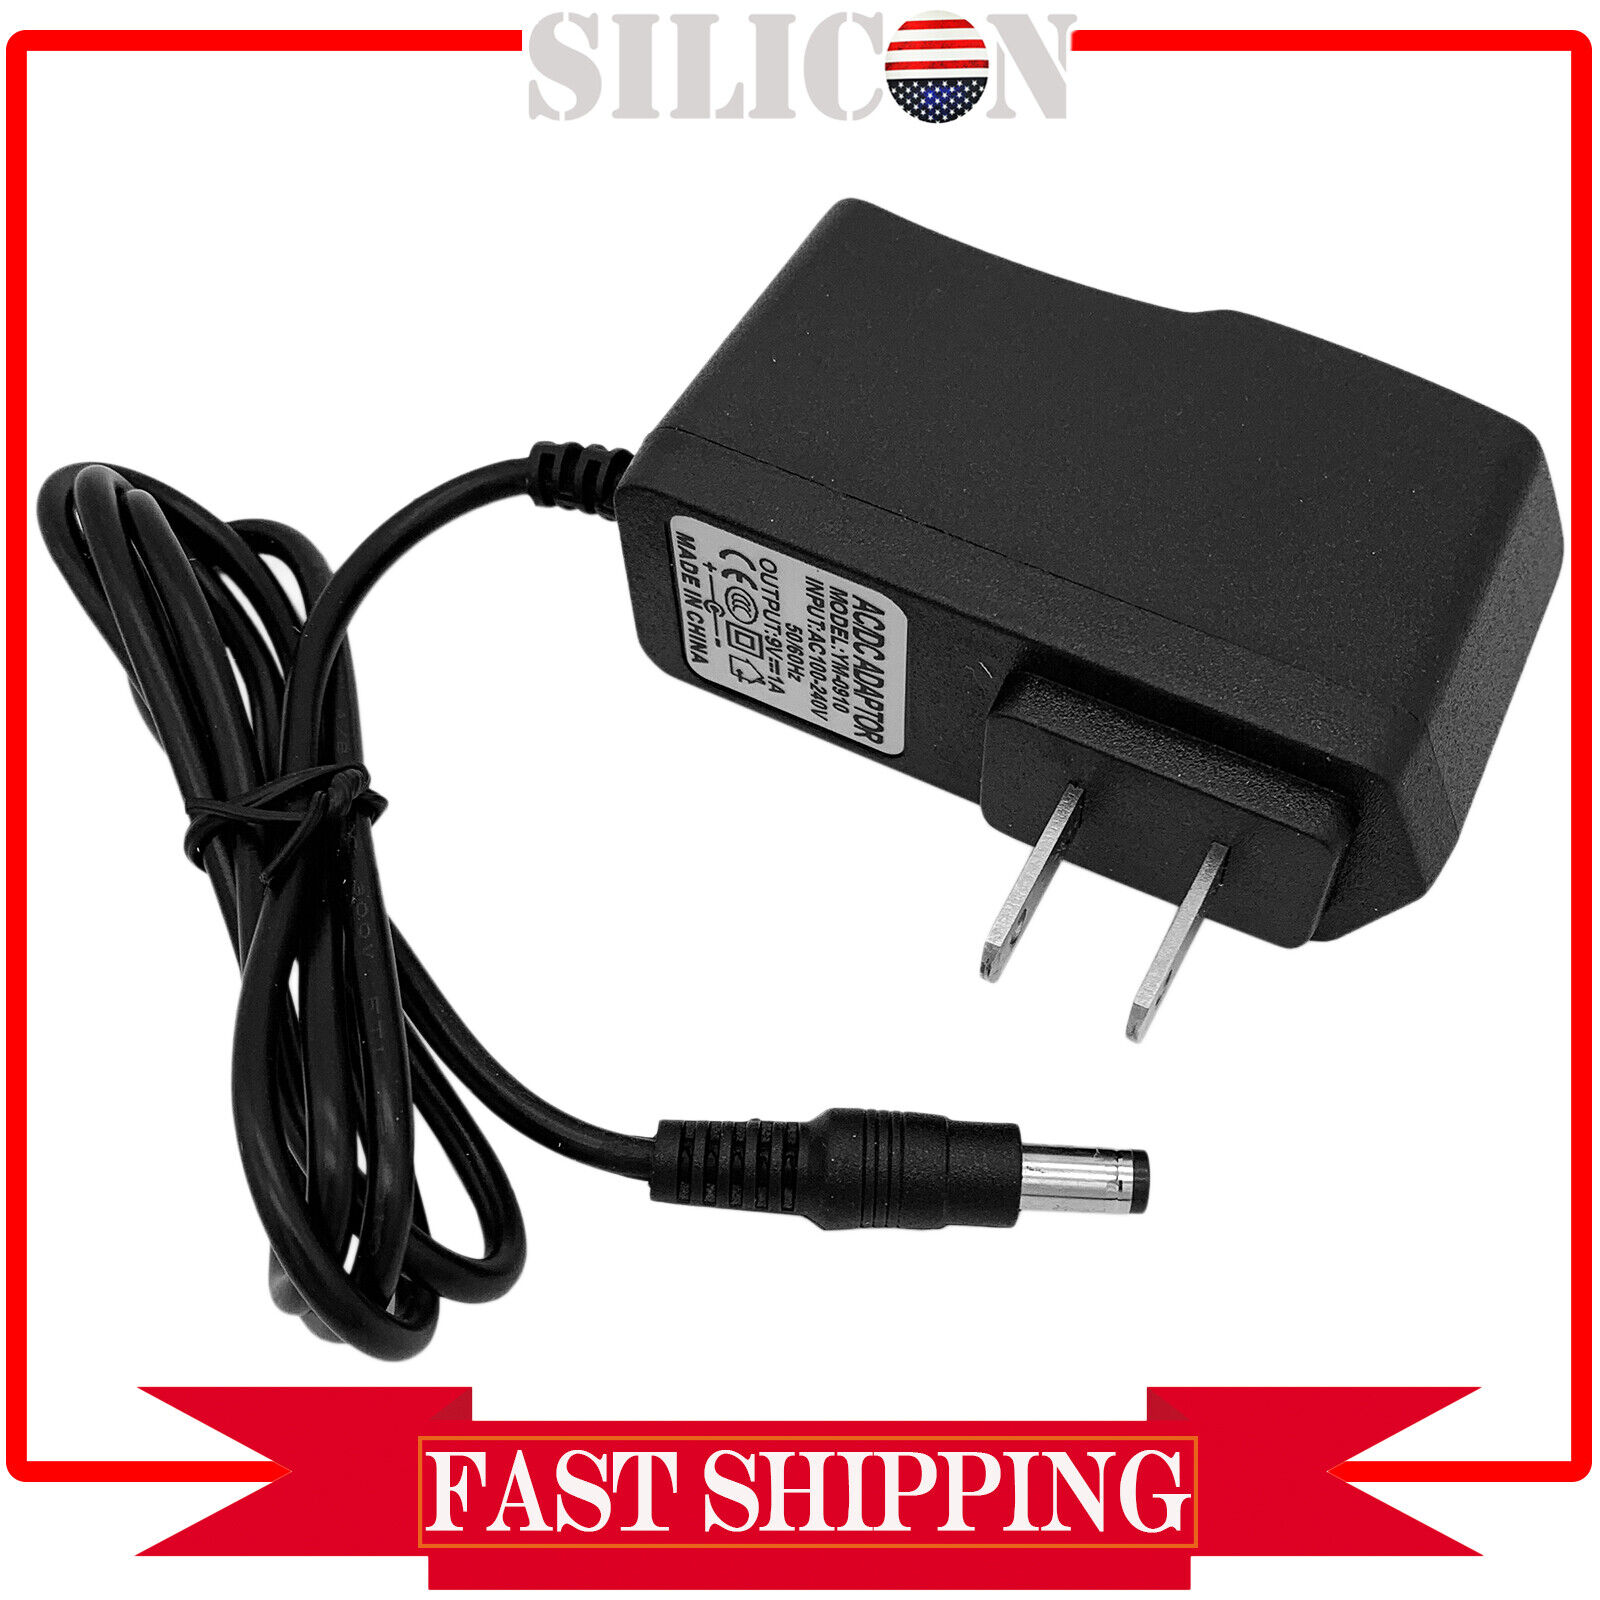 AC/DC Adapter Charger For RCBS 98923 98920 Chargemaster 1500 Combo Powder Scale